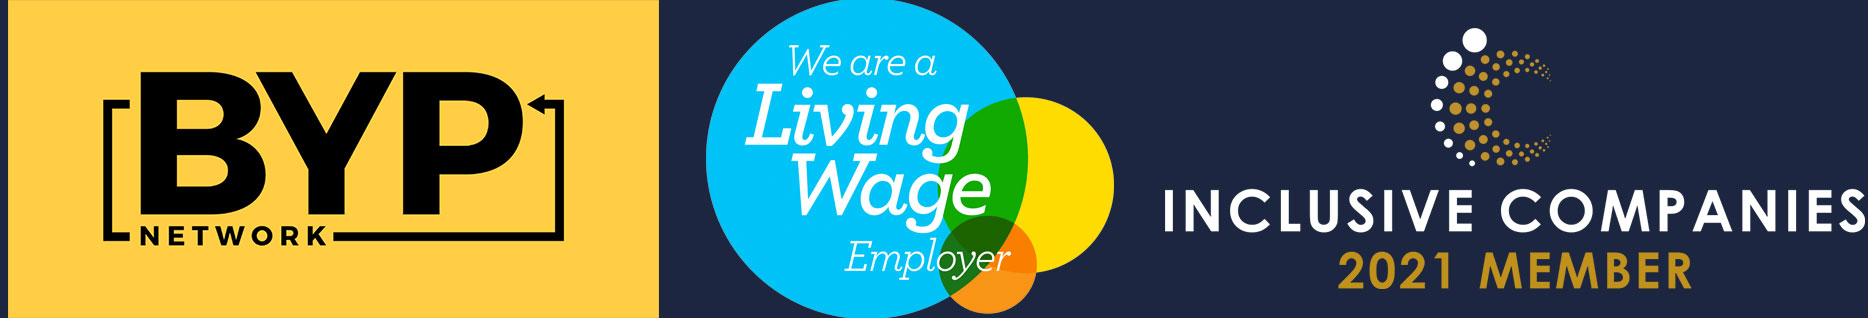 BYP network logo, Living Wage logo, Inclusive Companies 2021 Member